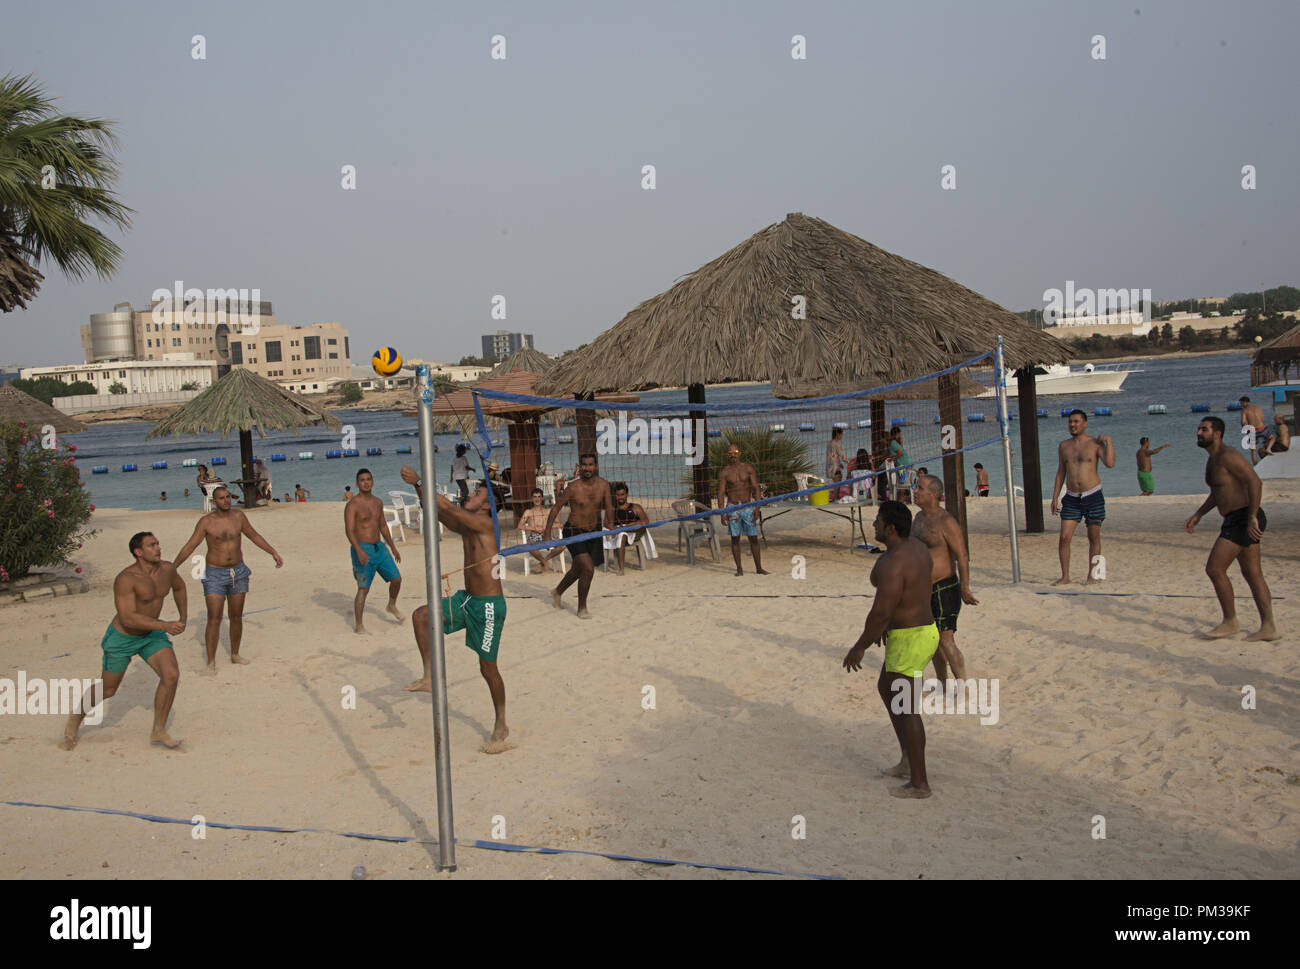 group of men playing volley ball at a private beach in Jeddah, Saudi Arabia Stock Photo